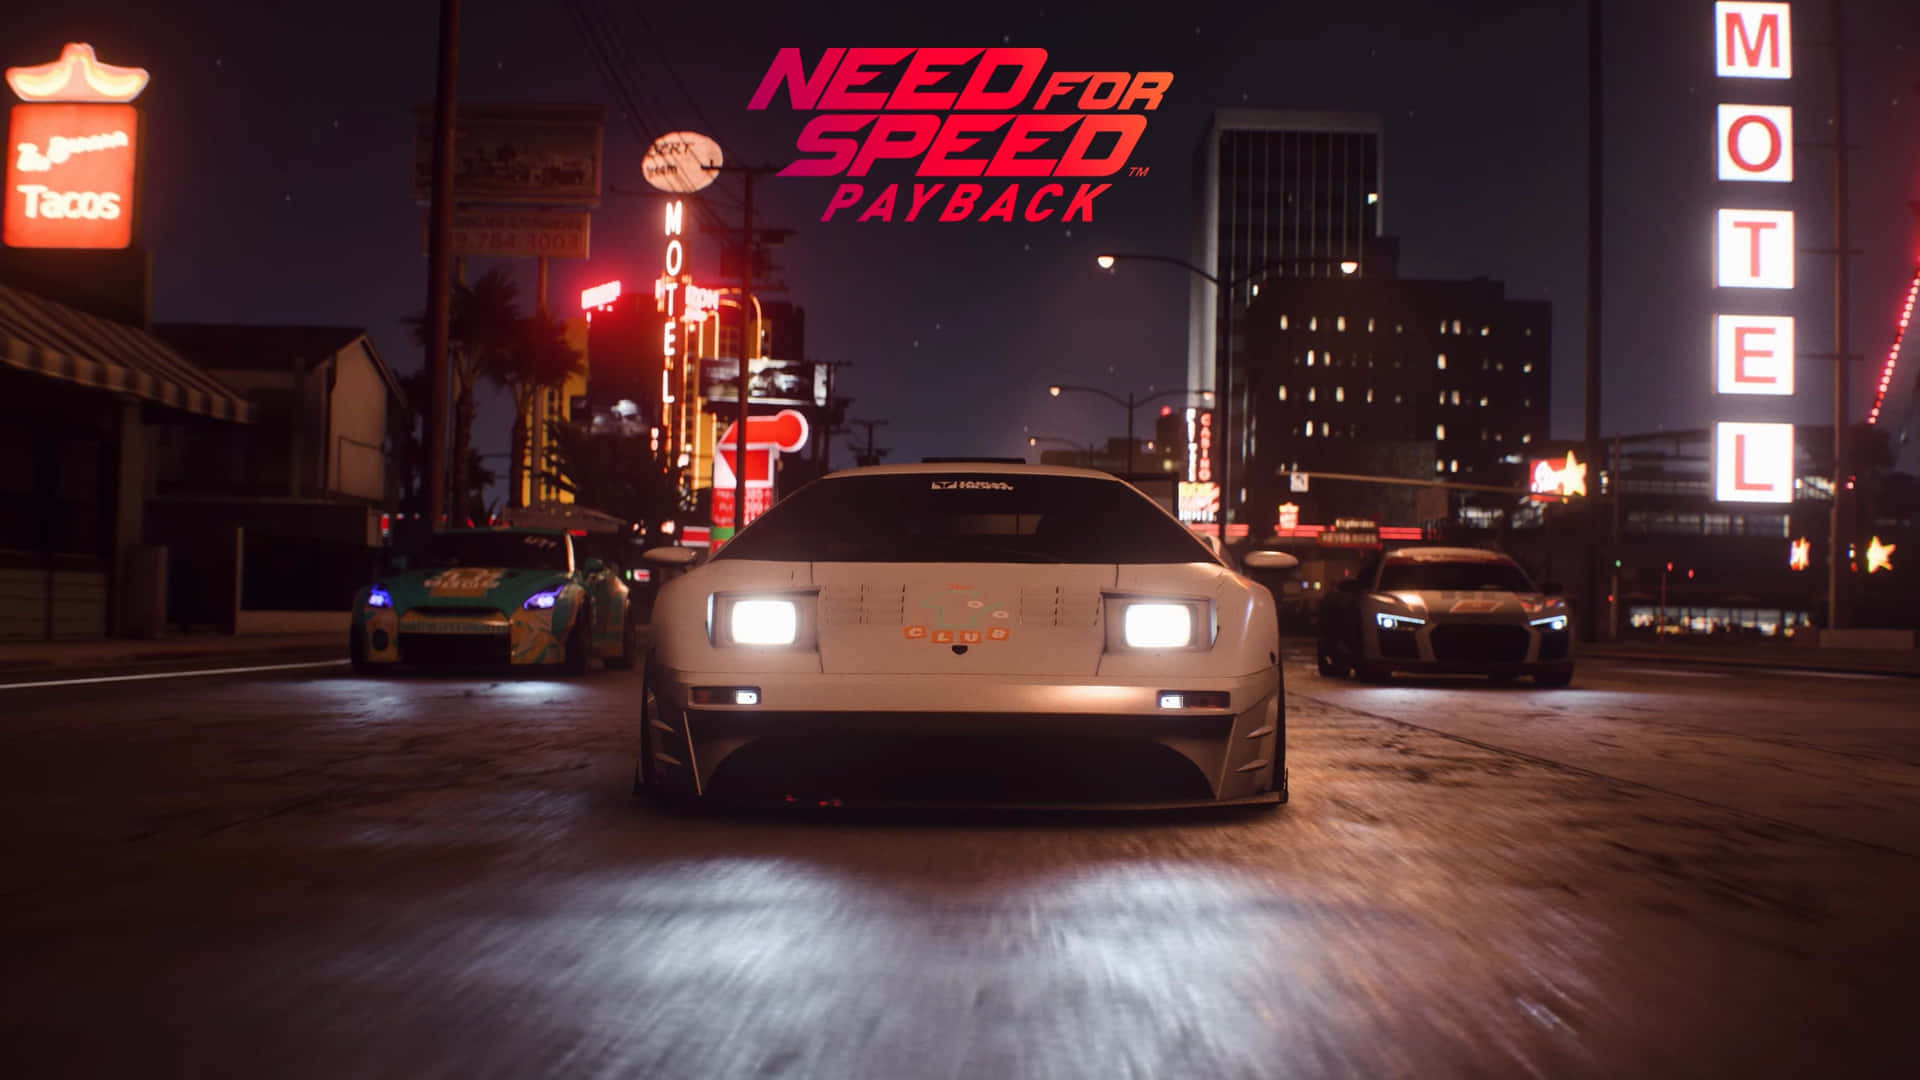 Posterdel Videogioco Need For Speed Payback In 4k Sfondo